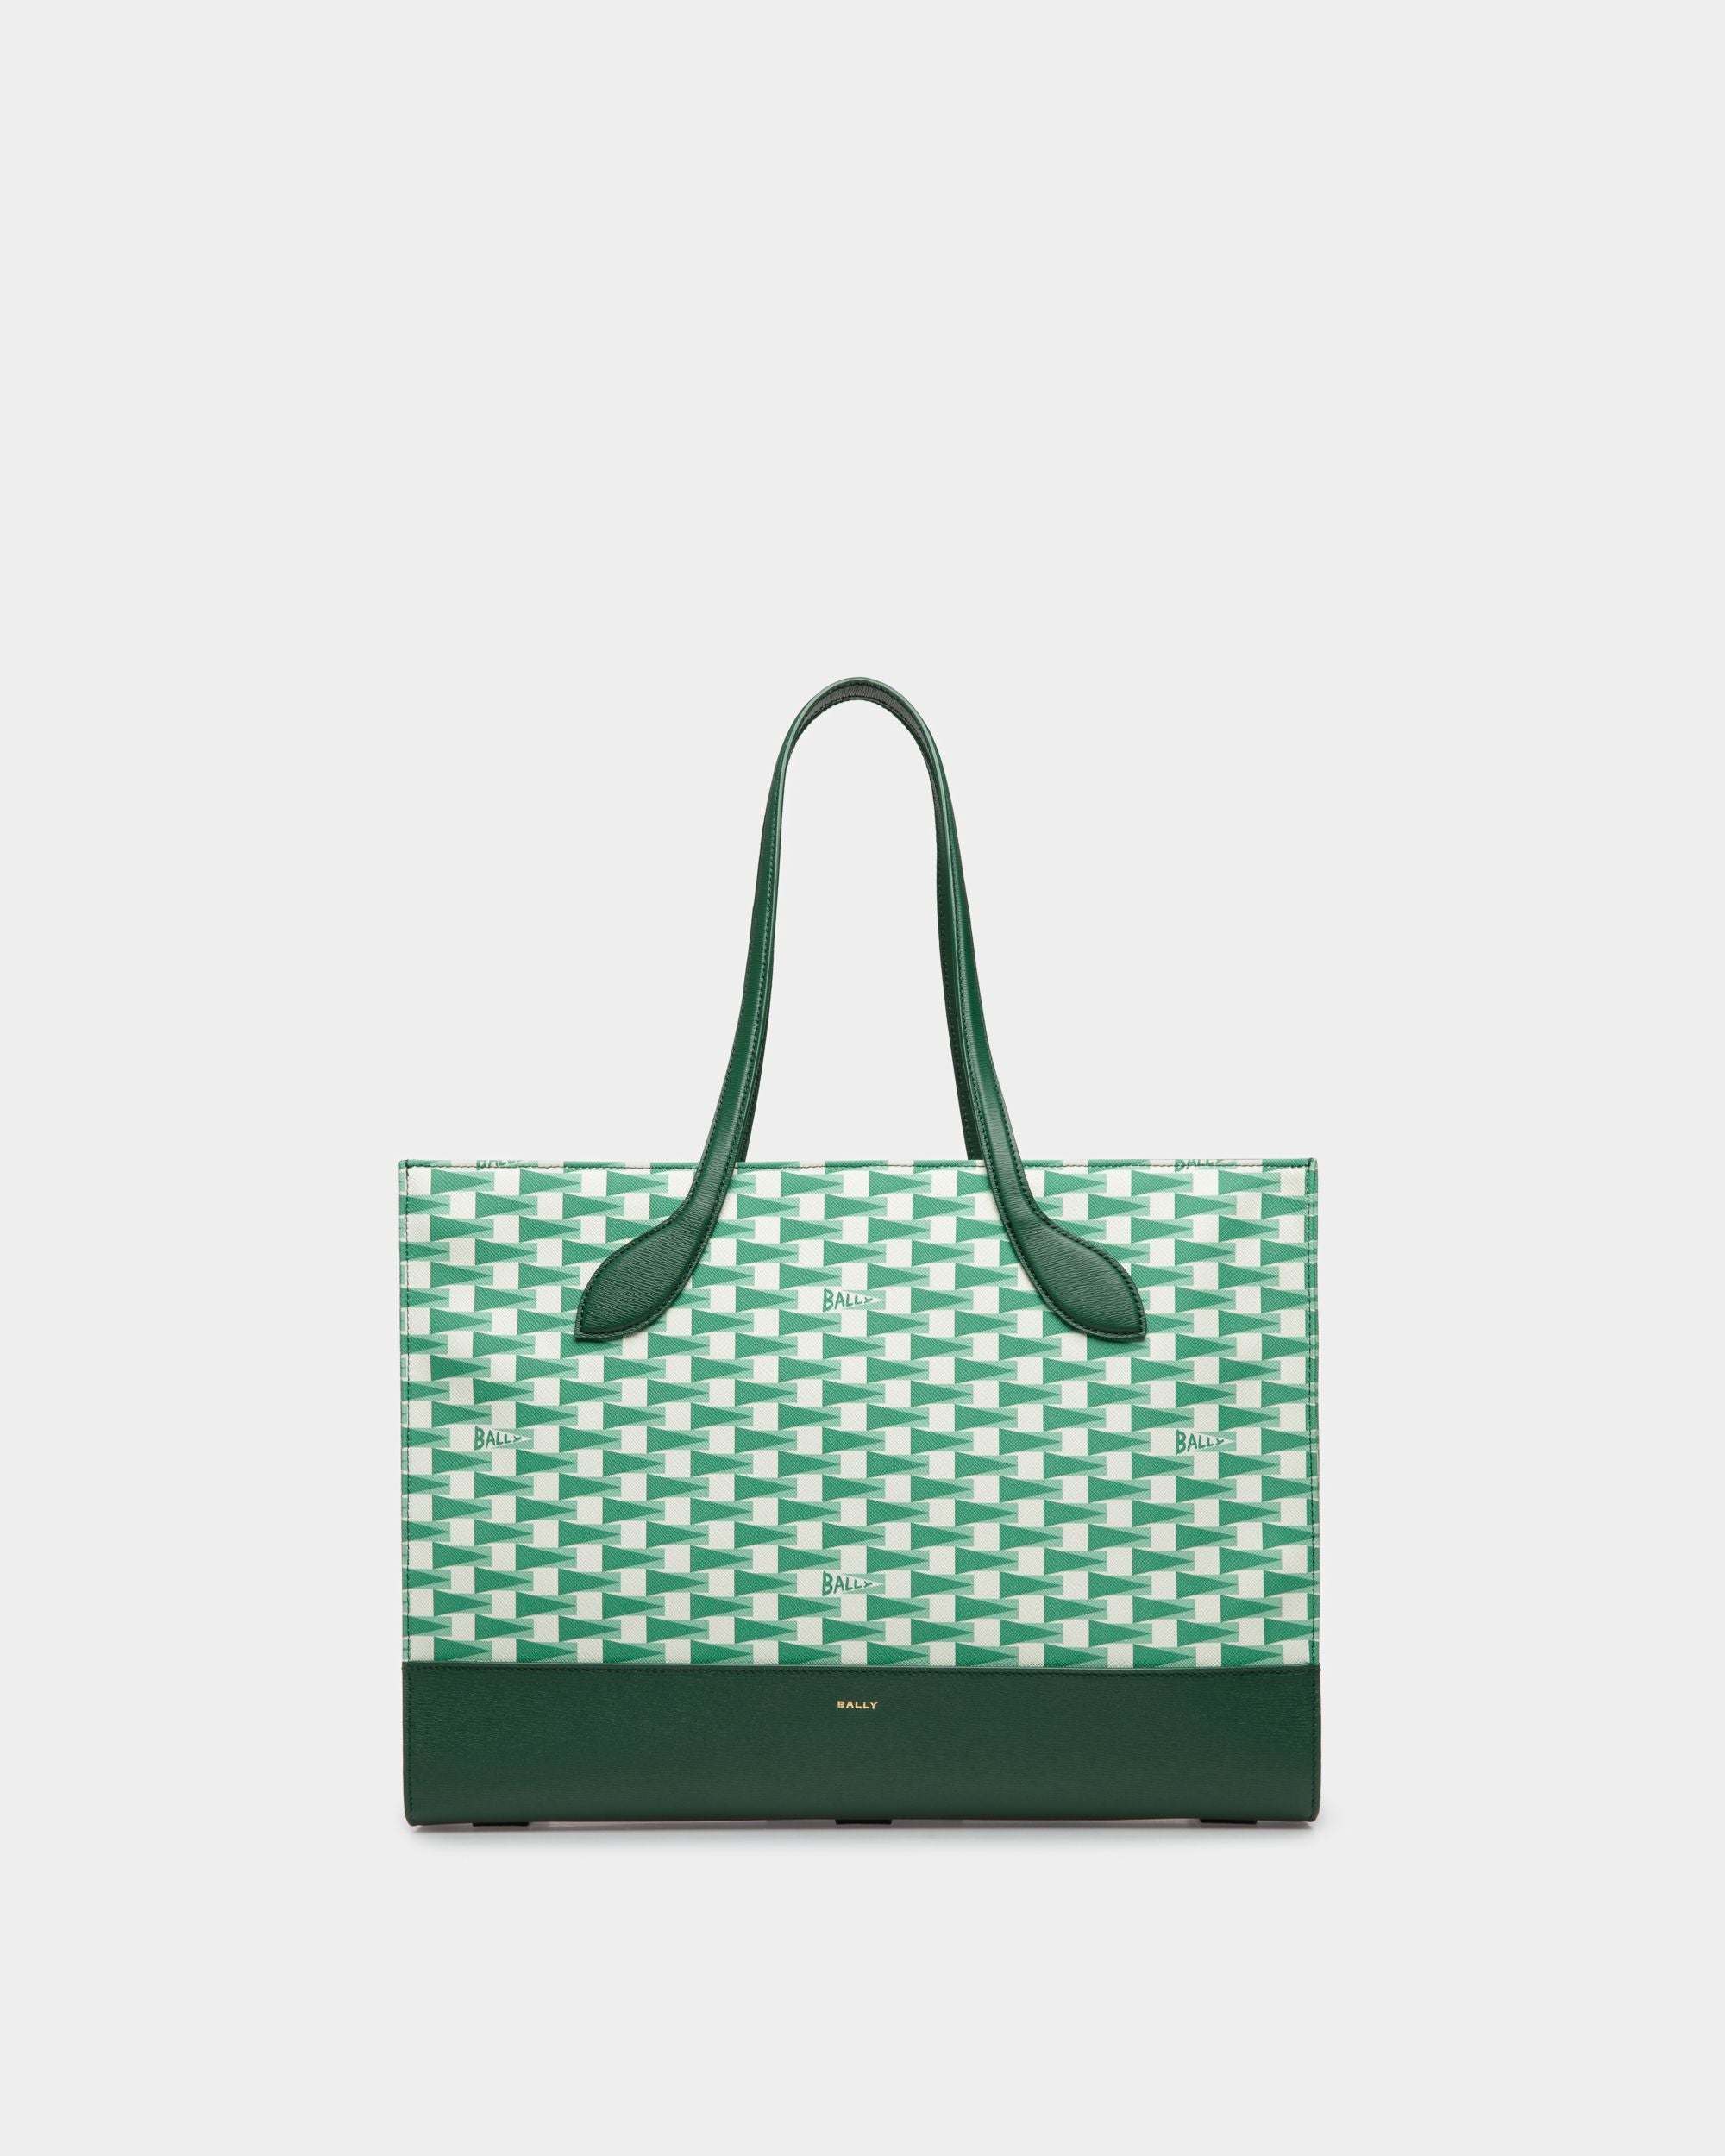 Keep On | Women's Tote Bag | Kelly Green TPU | Bally | Still Life Front